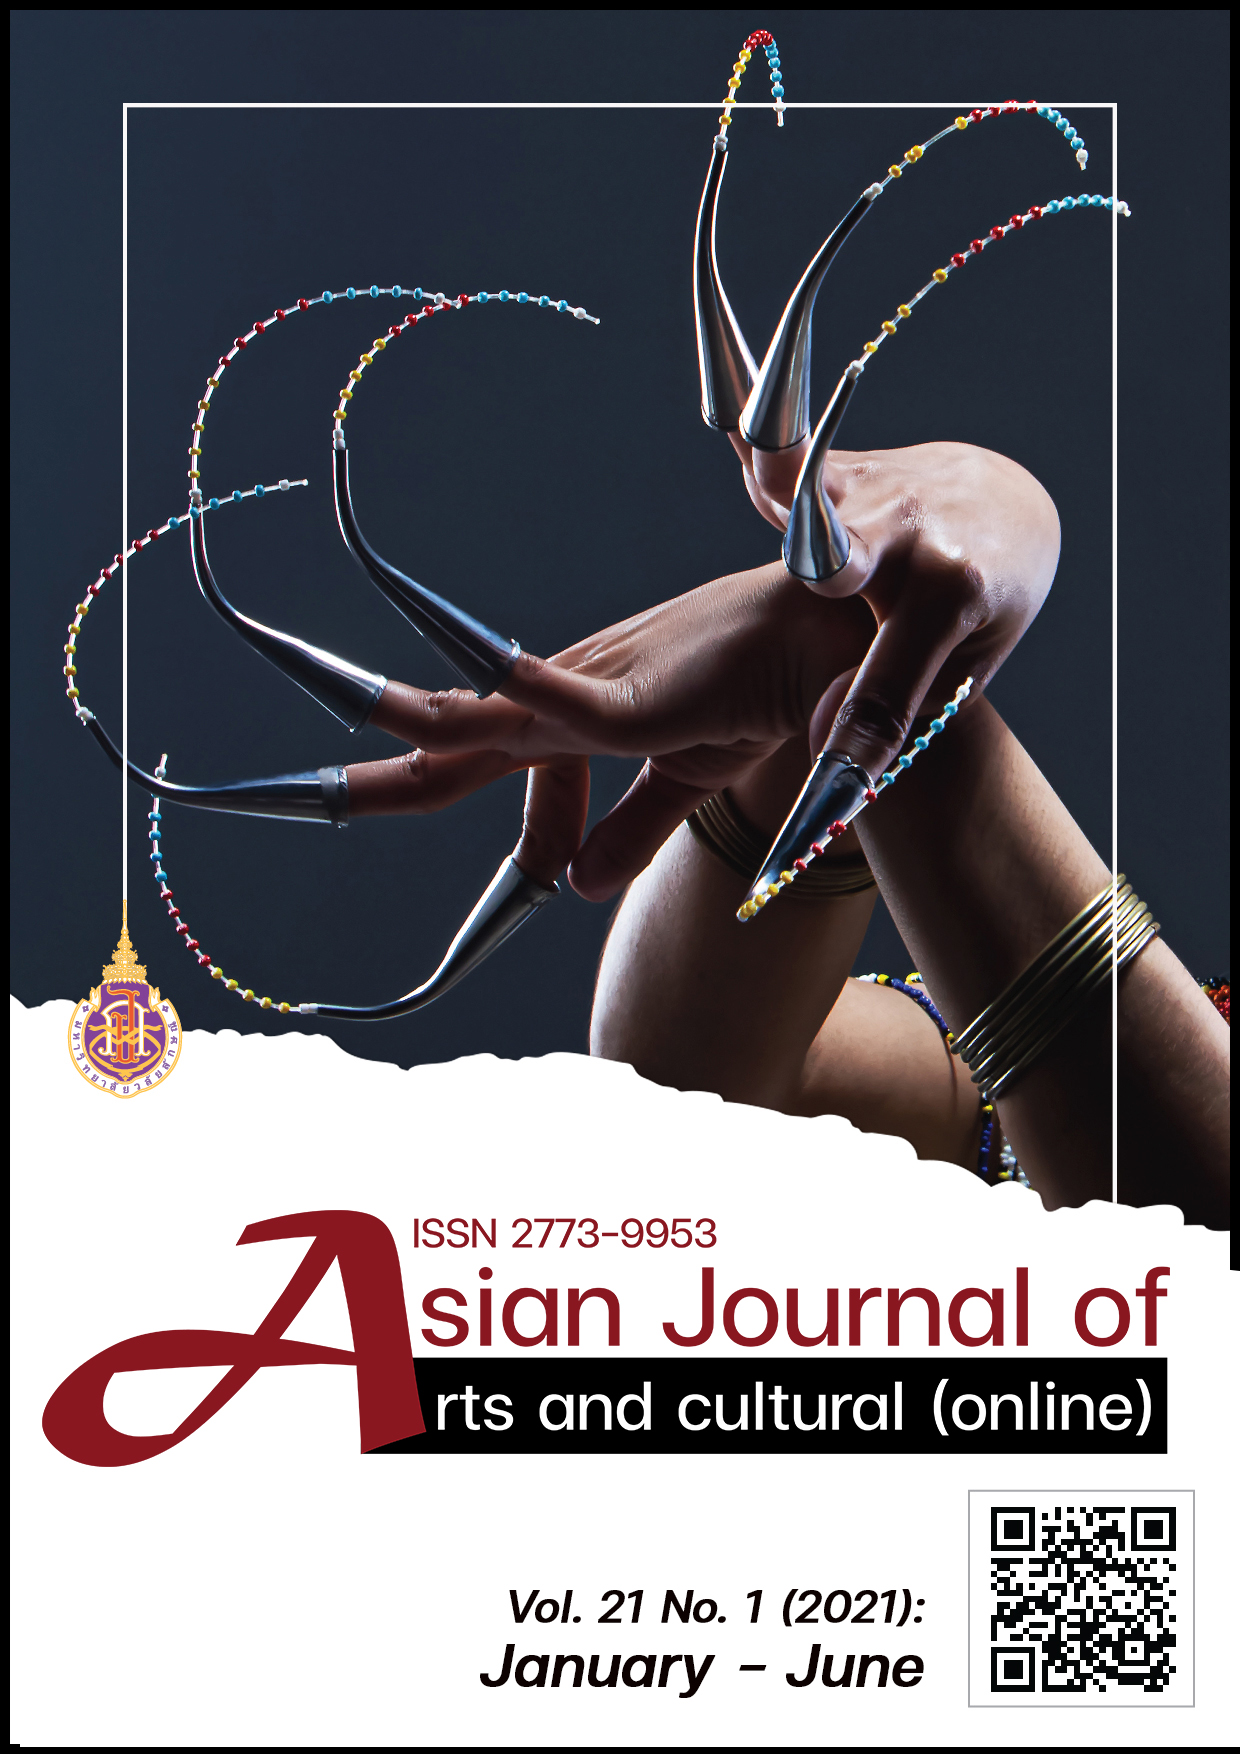 					View Vol. 21 No. 1 (2021): Asian Journal of Arts and Culture: January - June
				